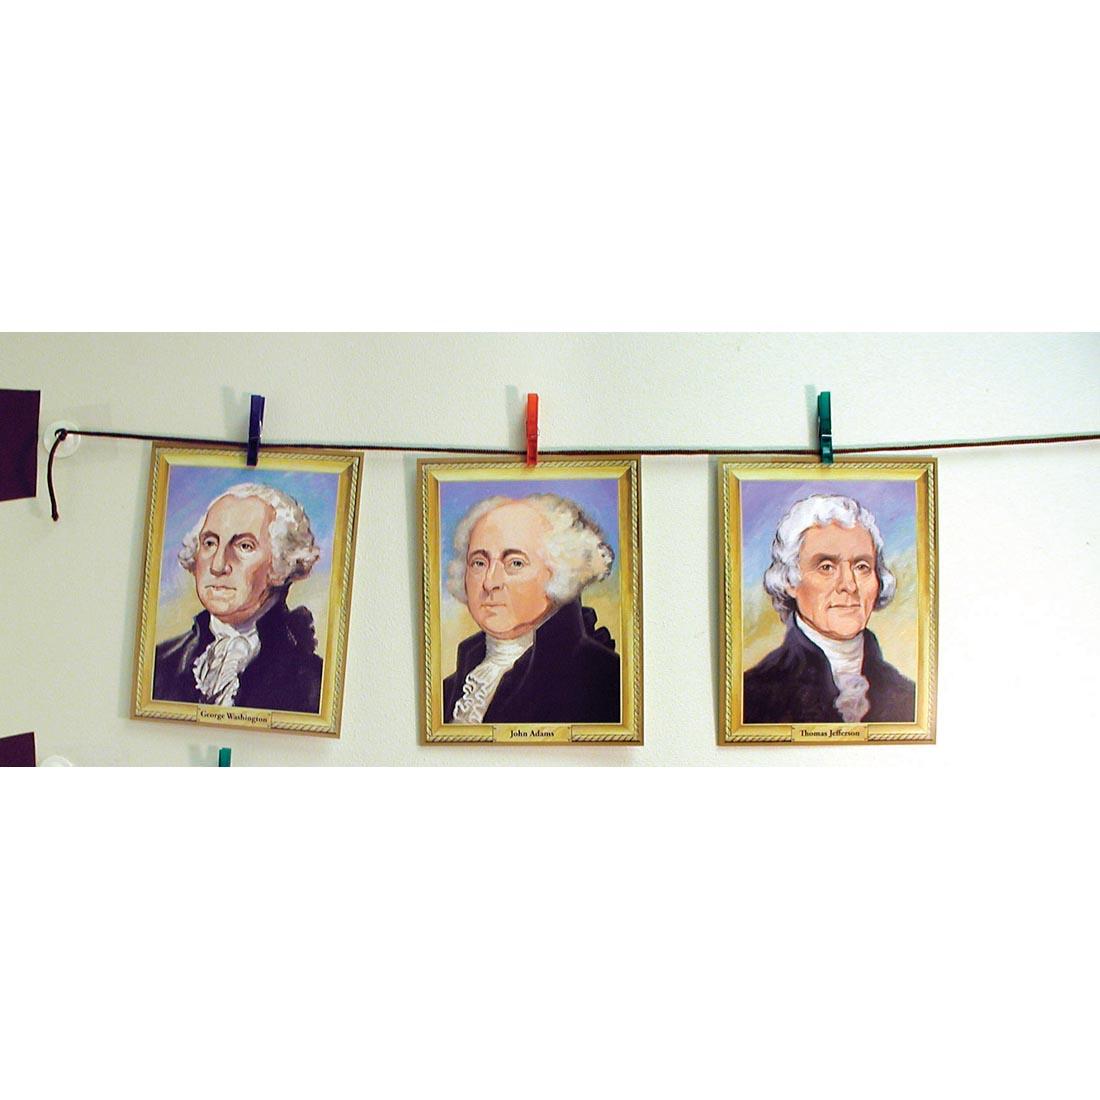 Classroom Clothesline shown holding pictures of presidents